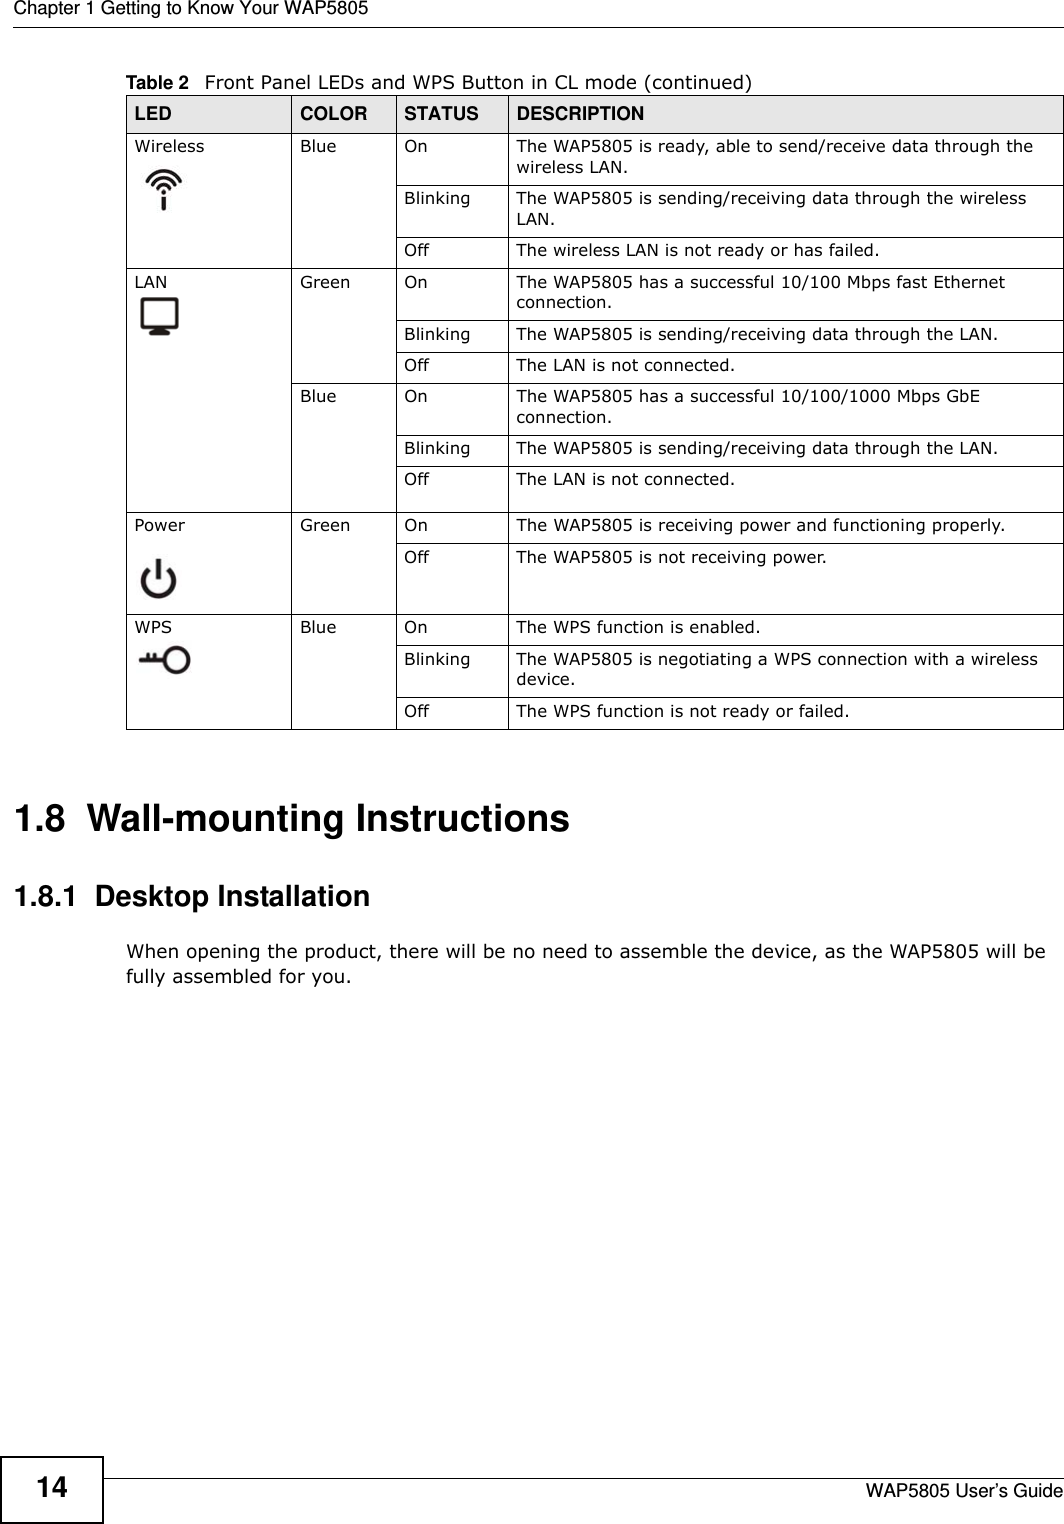 Chapter 1 Getting to Know Your WAP5805WAP5805 User’s Guide141.8  Wall-mounting Instructions1.8.1  Desktop InstallationWhen opening the product, there will be no need to assemble the device, as the WAP5805 will be fully assembled for you.Wireless Blue On The WAP5805 is ready, able to send/receive data through the wireless LAN. Blinking The WAP5805 is sending/receiving data through the wireless LAN.Off The wireless LAN is not ready or has failed.LAN  Green On The WAP5805 has a successful 10/100 Mbps fast Ethernet connection. Blinking The WAP5805 is sending/receiving data through the LAN.Off The LAN is not connected.Blue On The WAP5805 has a successful 10/100/1000 Mbps GbE connection. Blinking The WAP5805 is sending/receiving data through the LAN.Off The LAN is not connected.Power Green On The WAP5805 is receiving power and functioning properly. Off The WAP5805 is not receiving power.WPS Blue On The WPS function is enabled.Blinking The WAP5805 is negotiating a WPS connection with a wireless device.Off The WPS function is not ready or failed.Table 2   Front Panel LEDs and WPS Button in CL mode (continued)LED COLOR STATUS DESCRIPTION